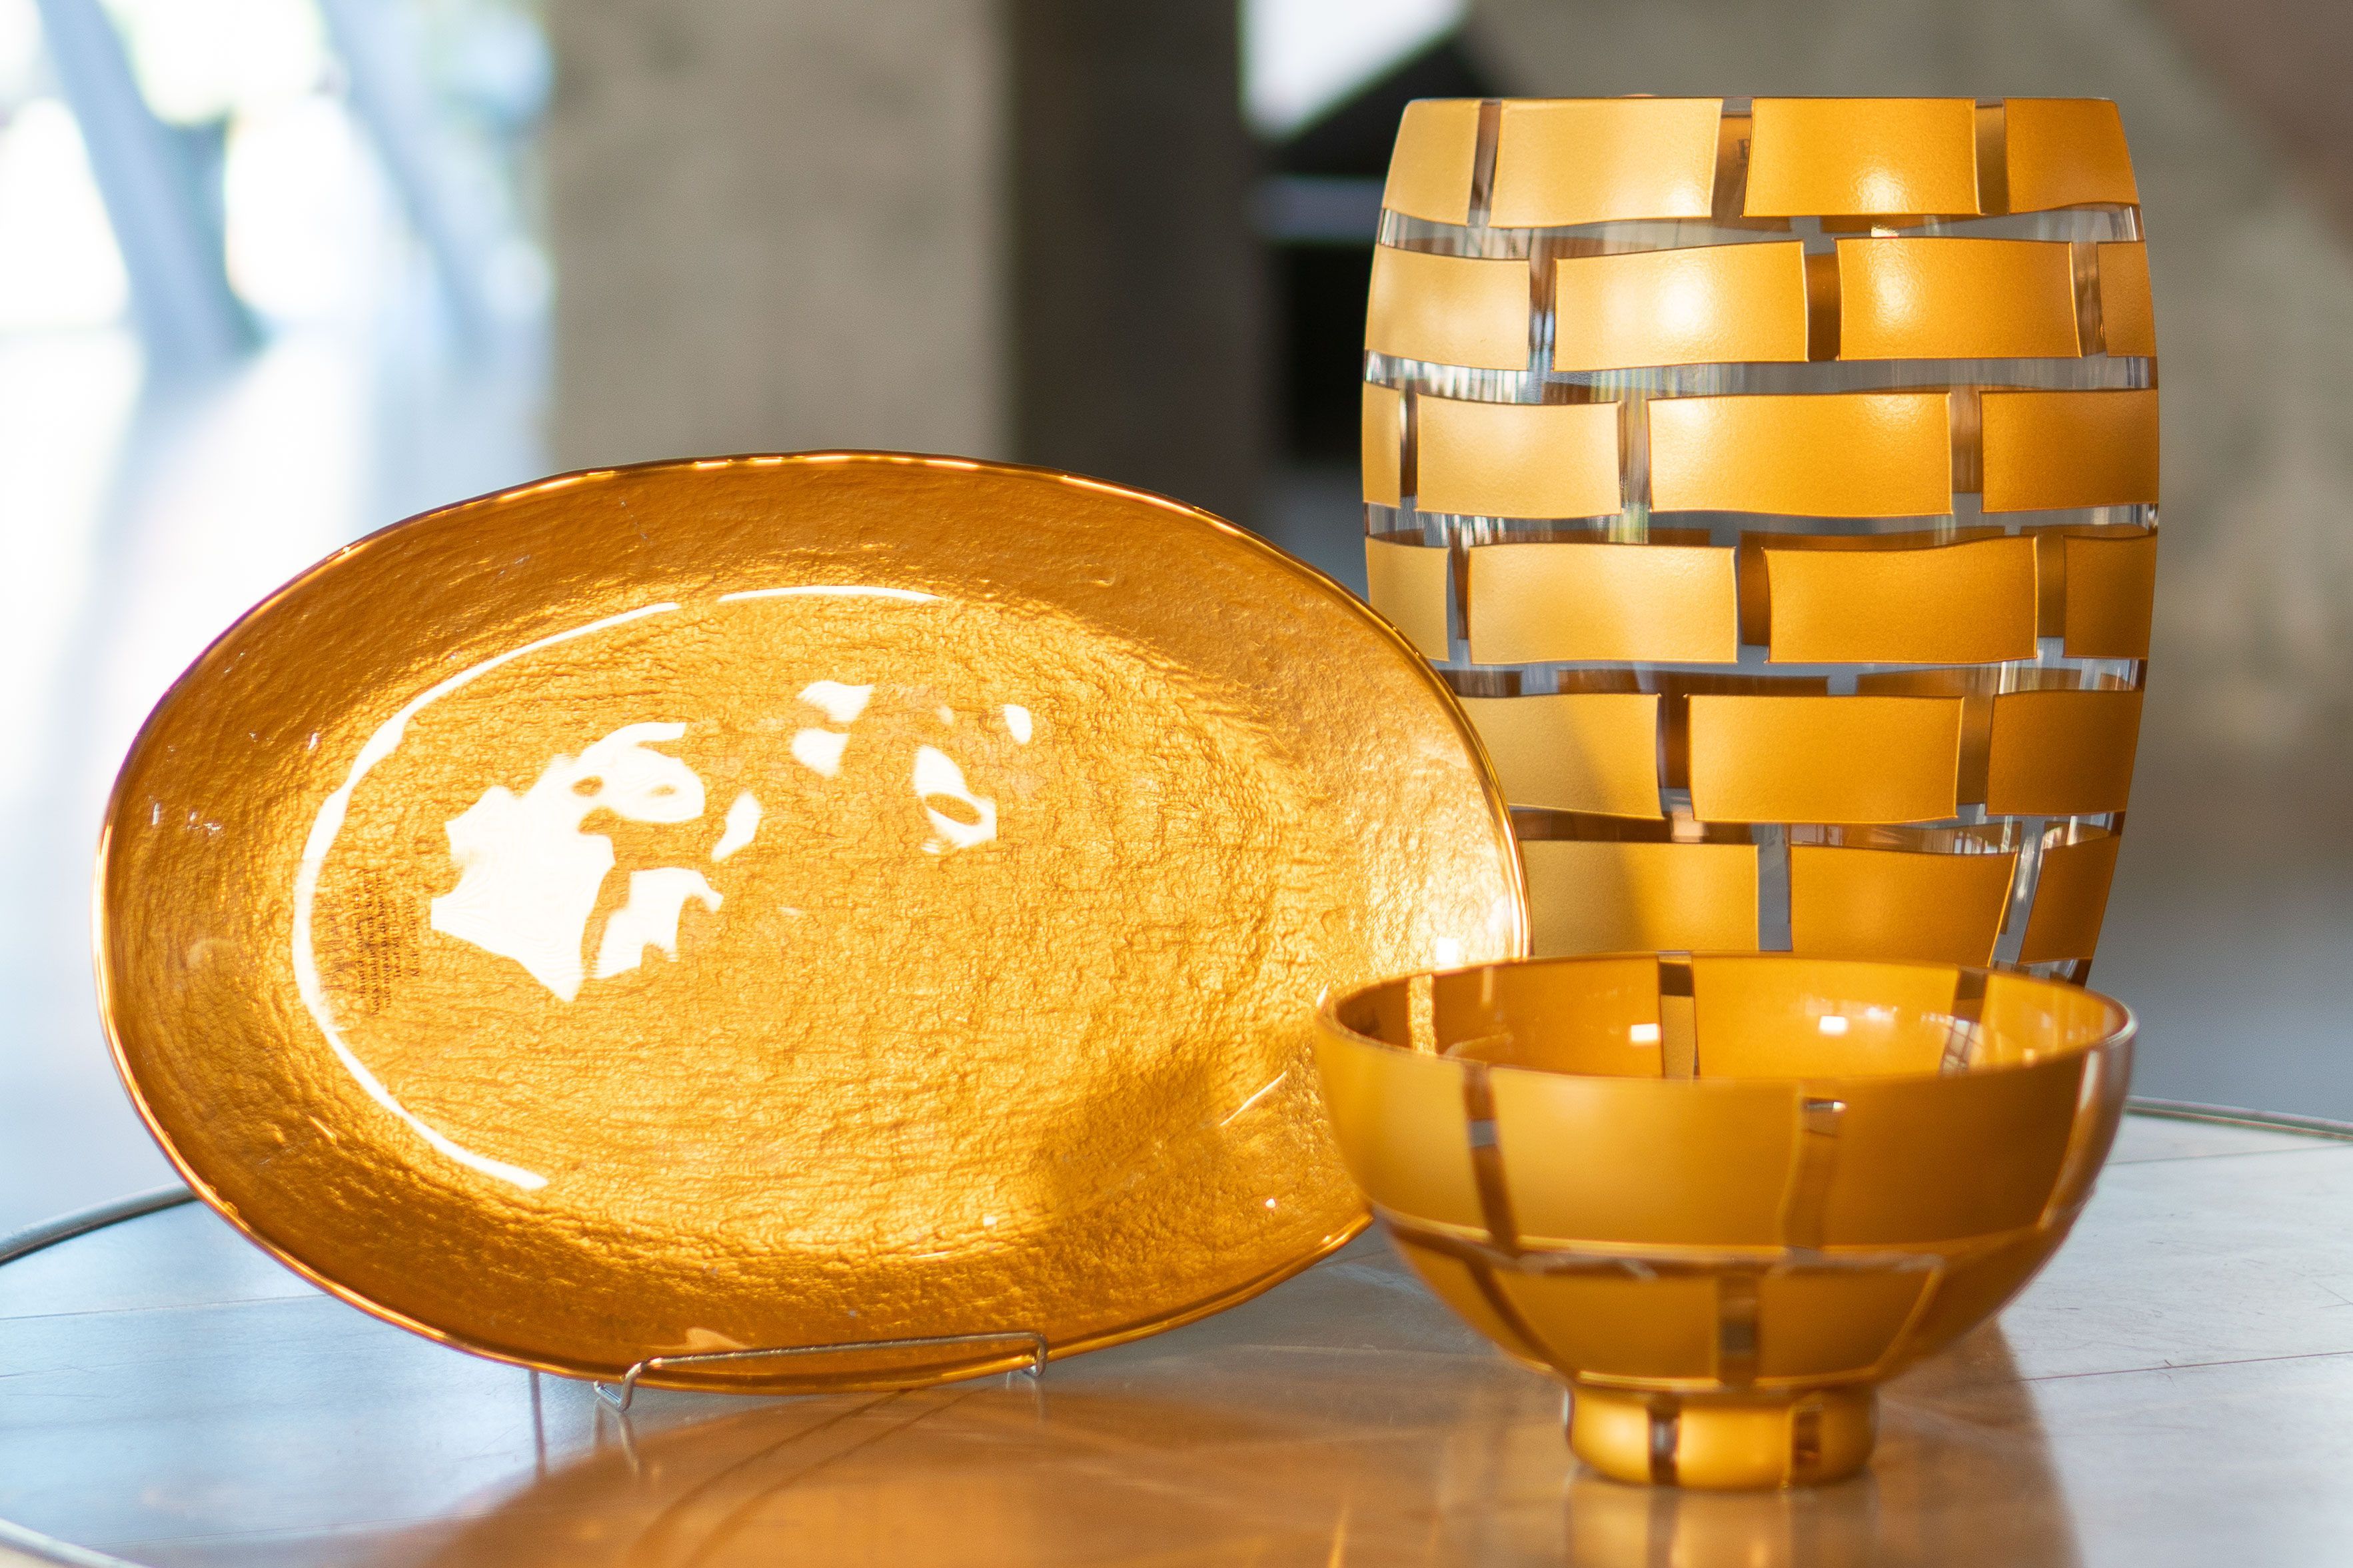 Update Your Home Décor This Fall With Beautiful Badash Throughout Vase And Bowl Wall Decor (View 14 of 30)